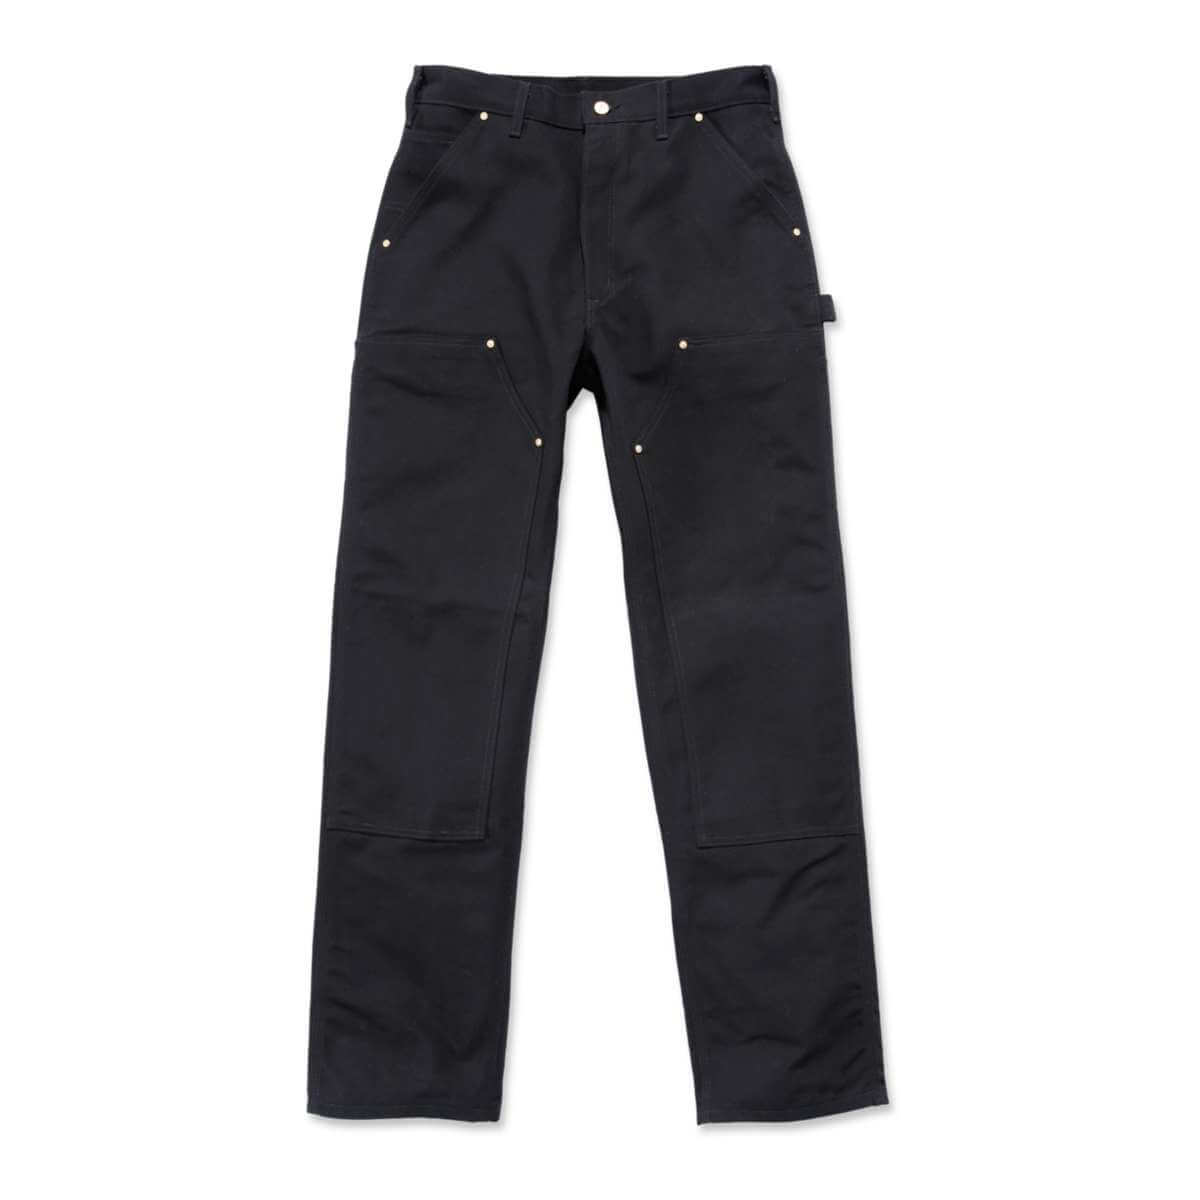 Loose Fit Washed Duck Flannel-Lined Utility Work Pant